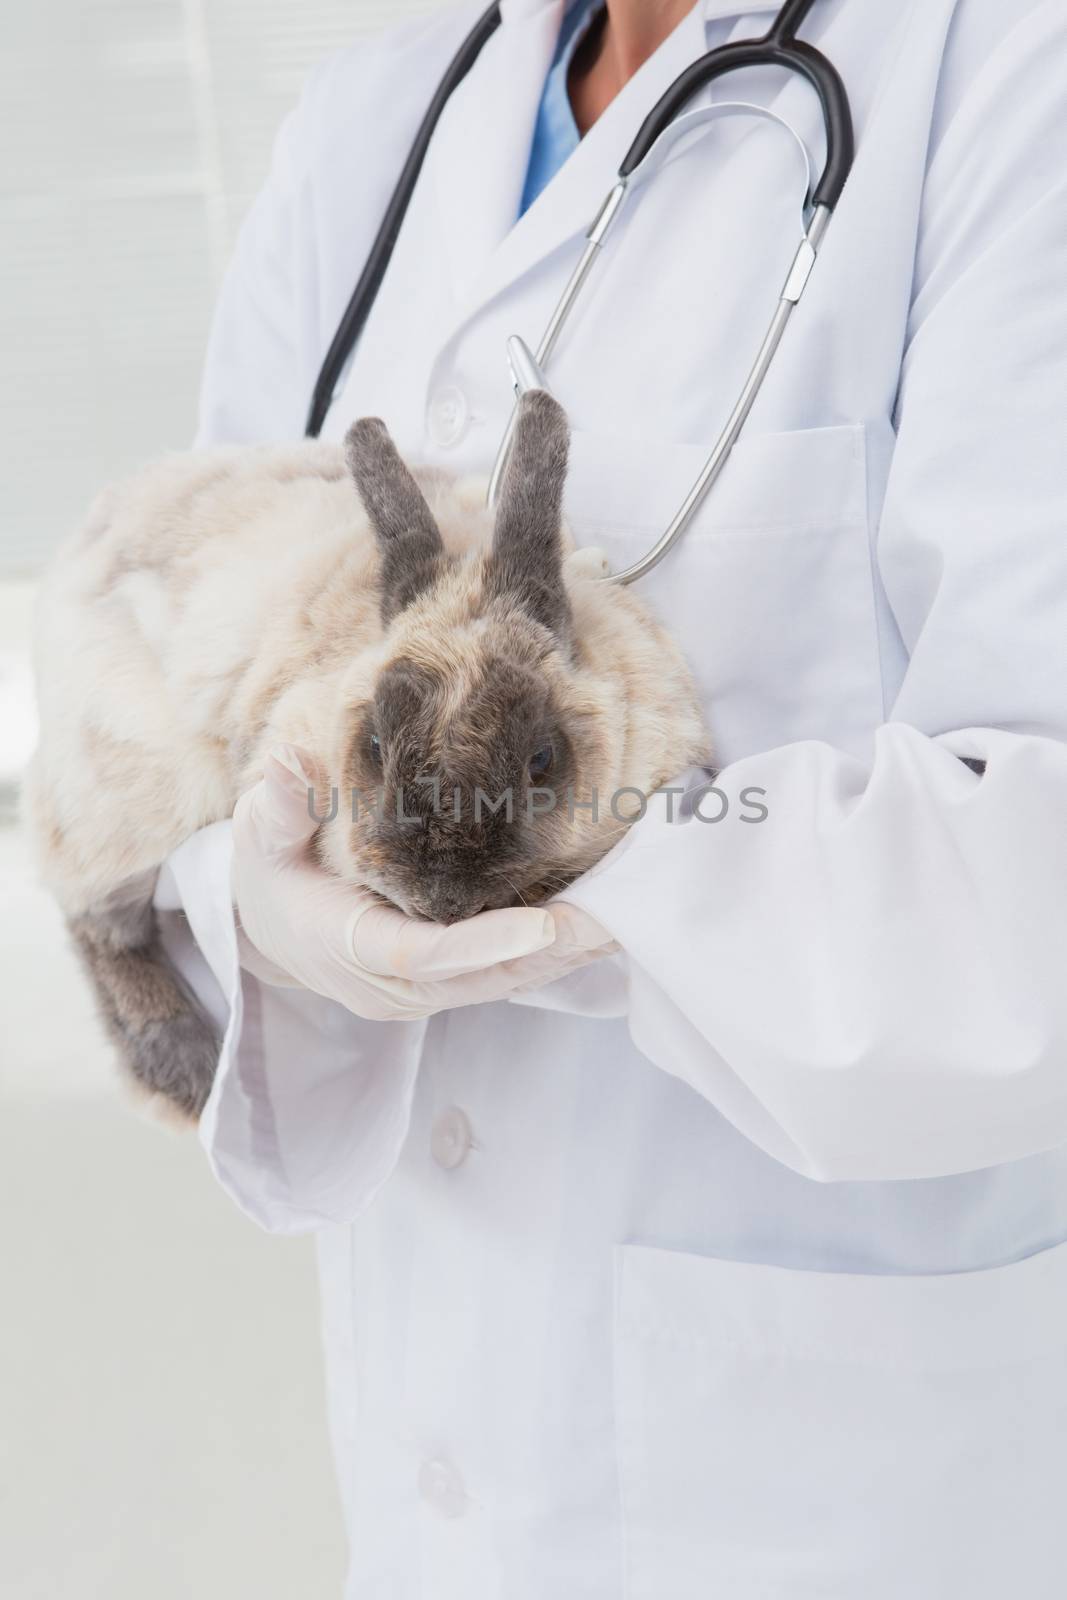 Veterinarian with a rabbit in his arms in medical office 